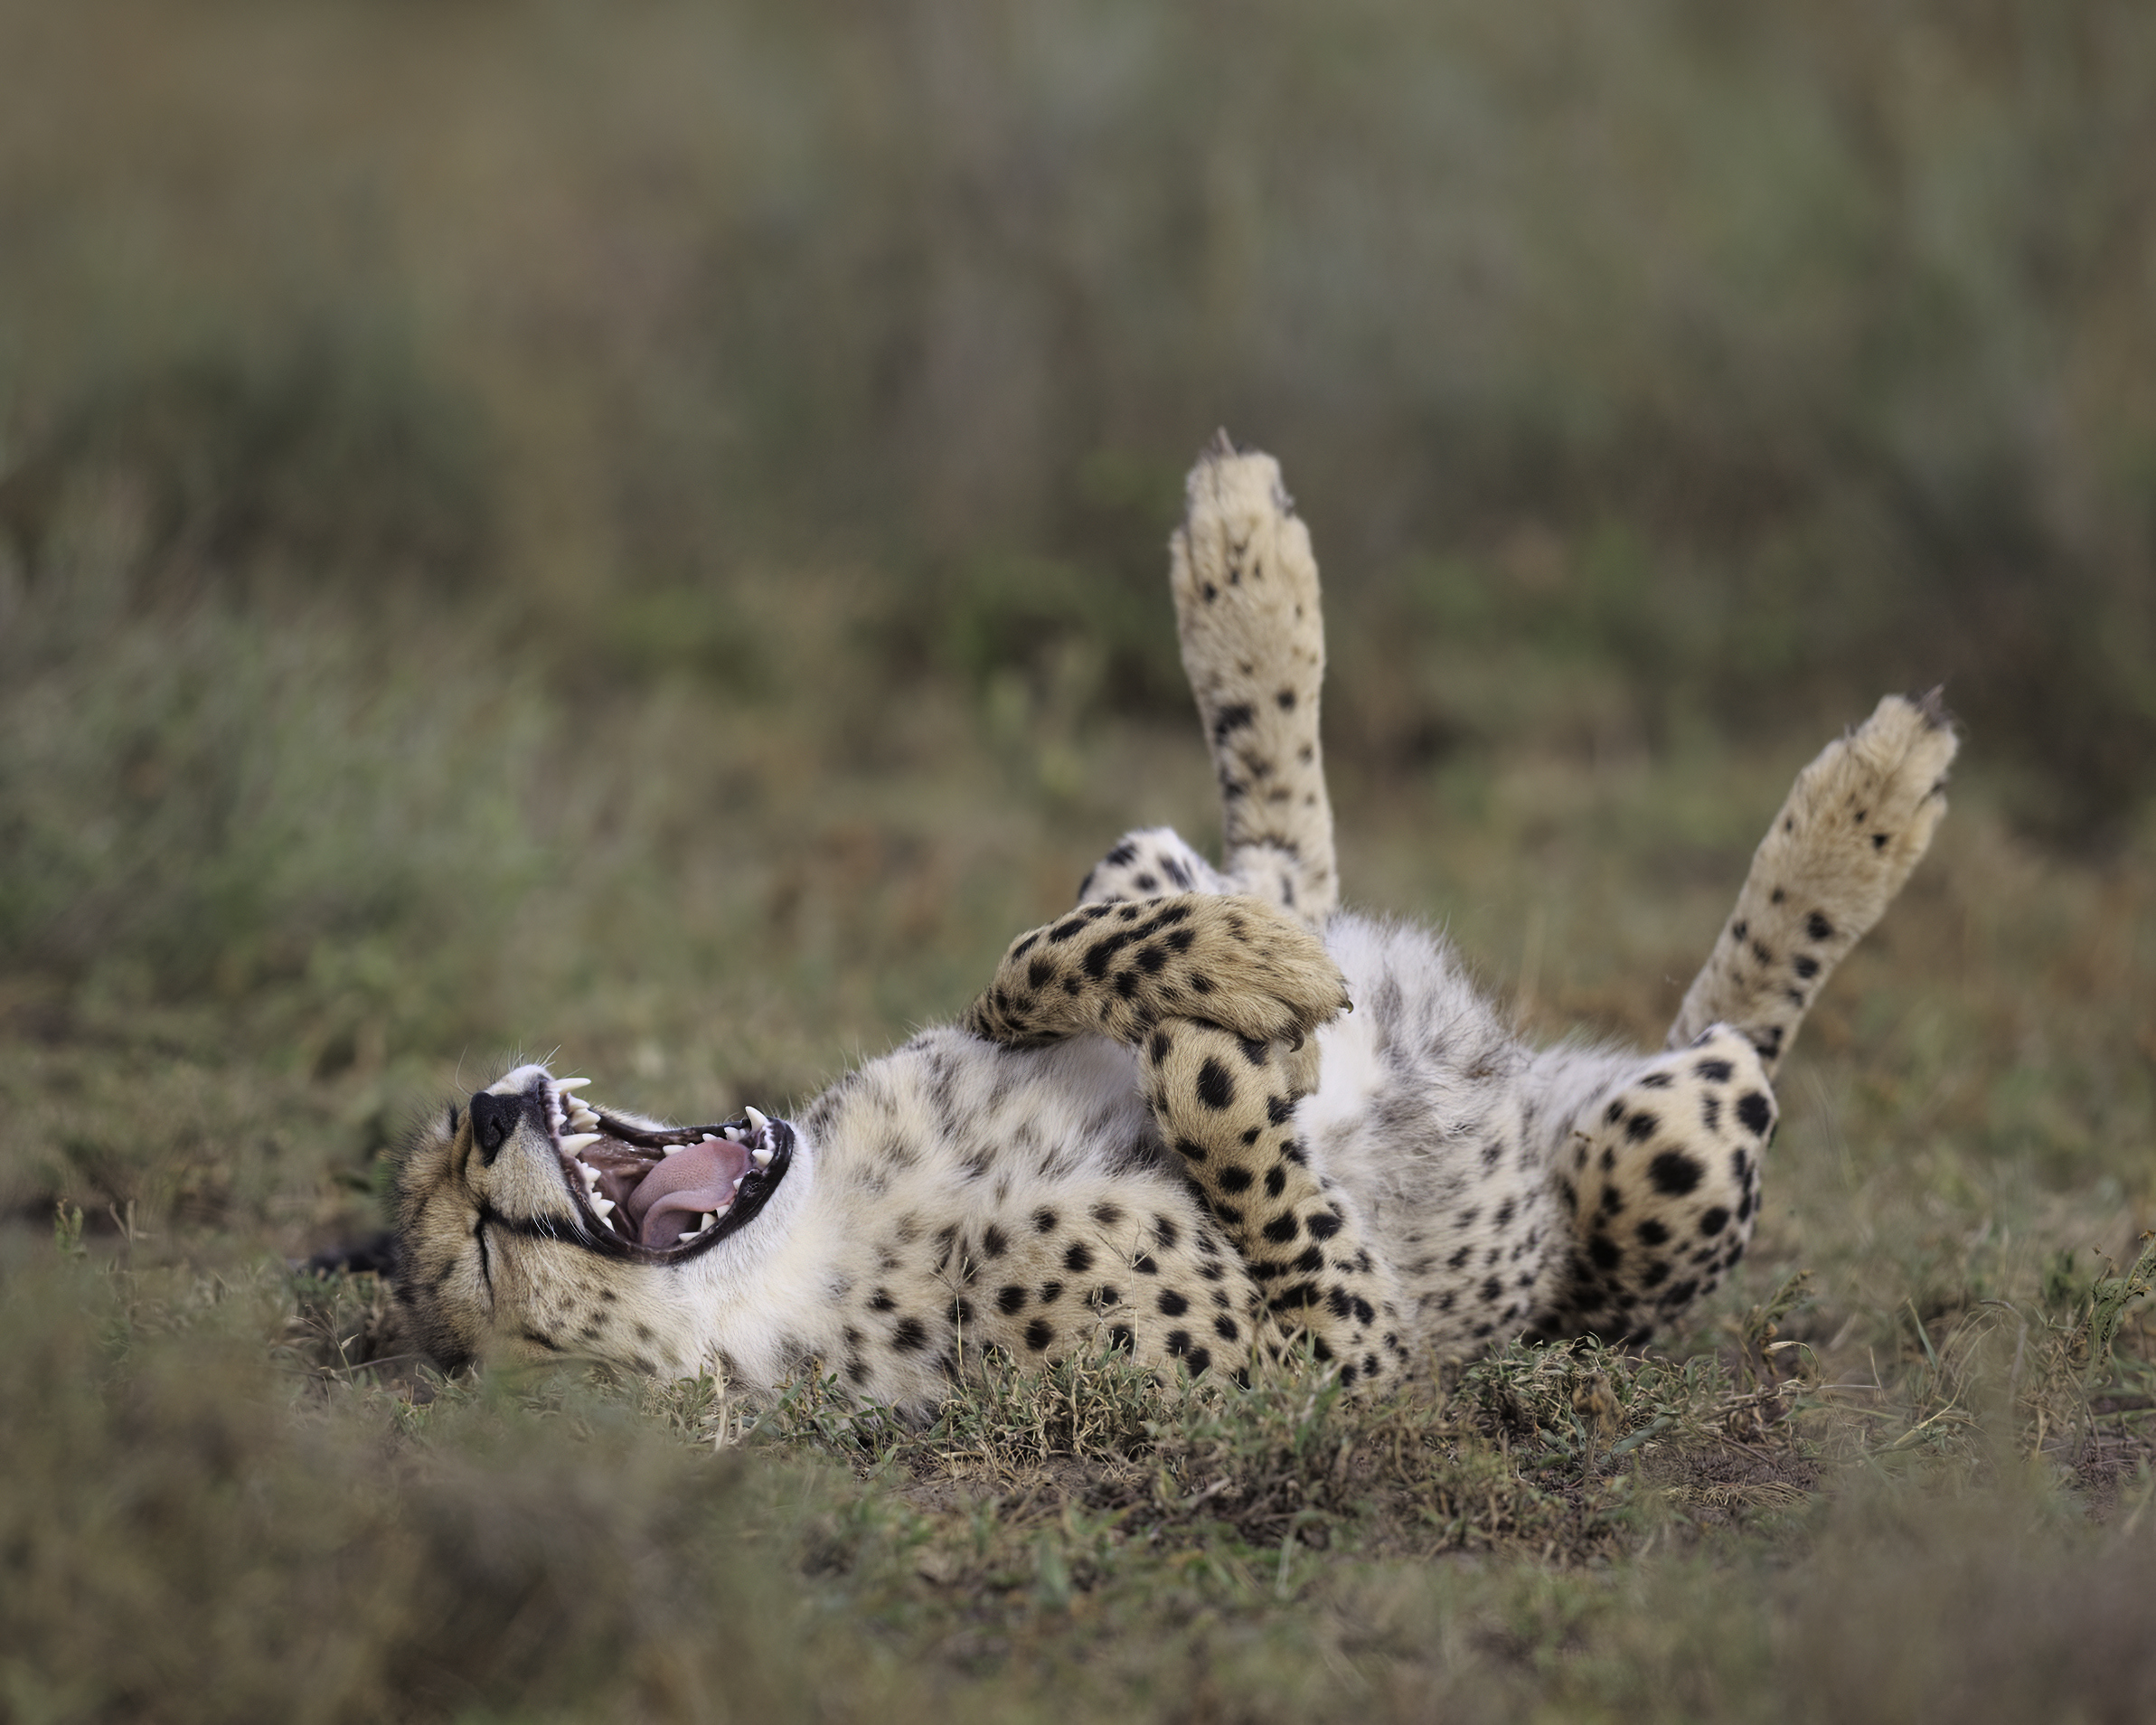 Cheetah lying on its back in the grass, seemingly laughing or yawning